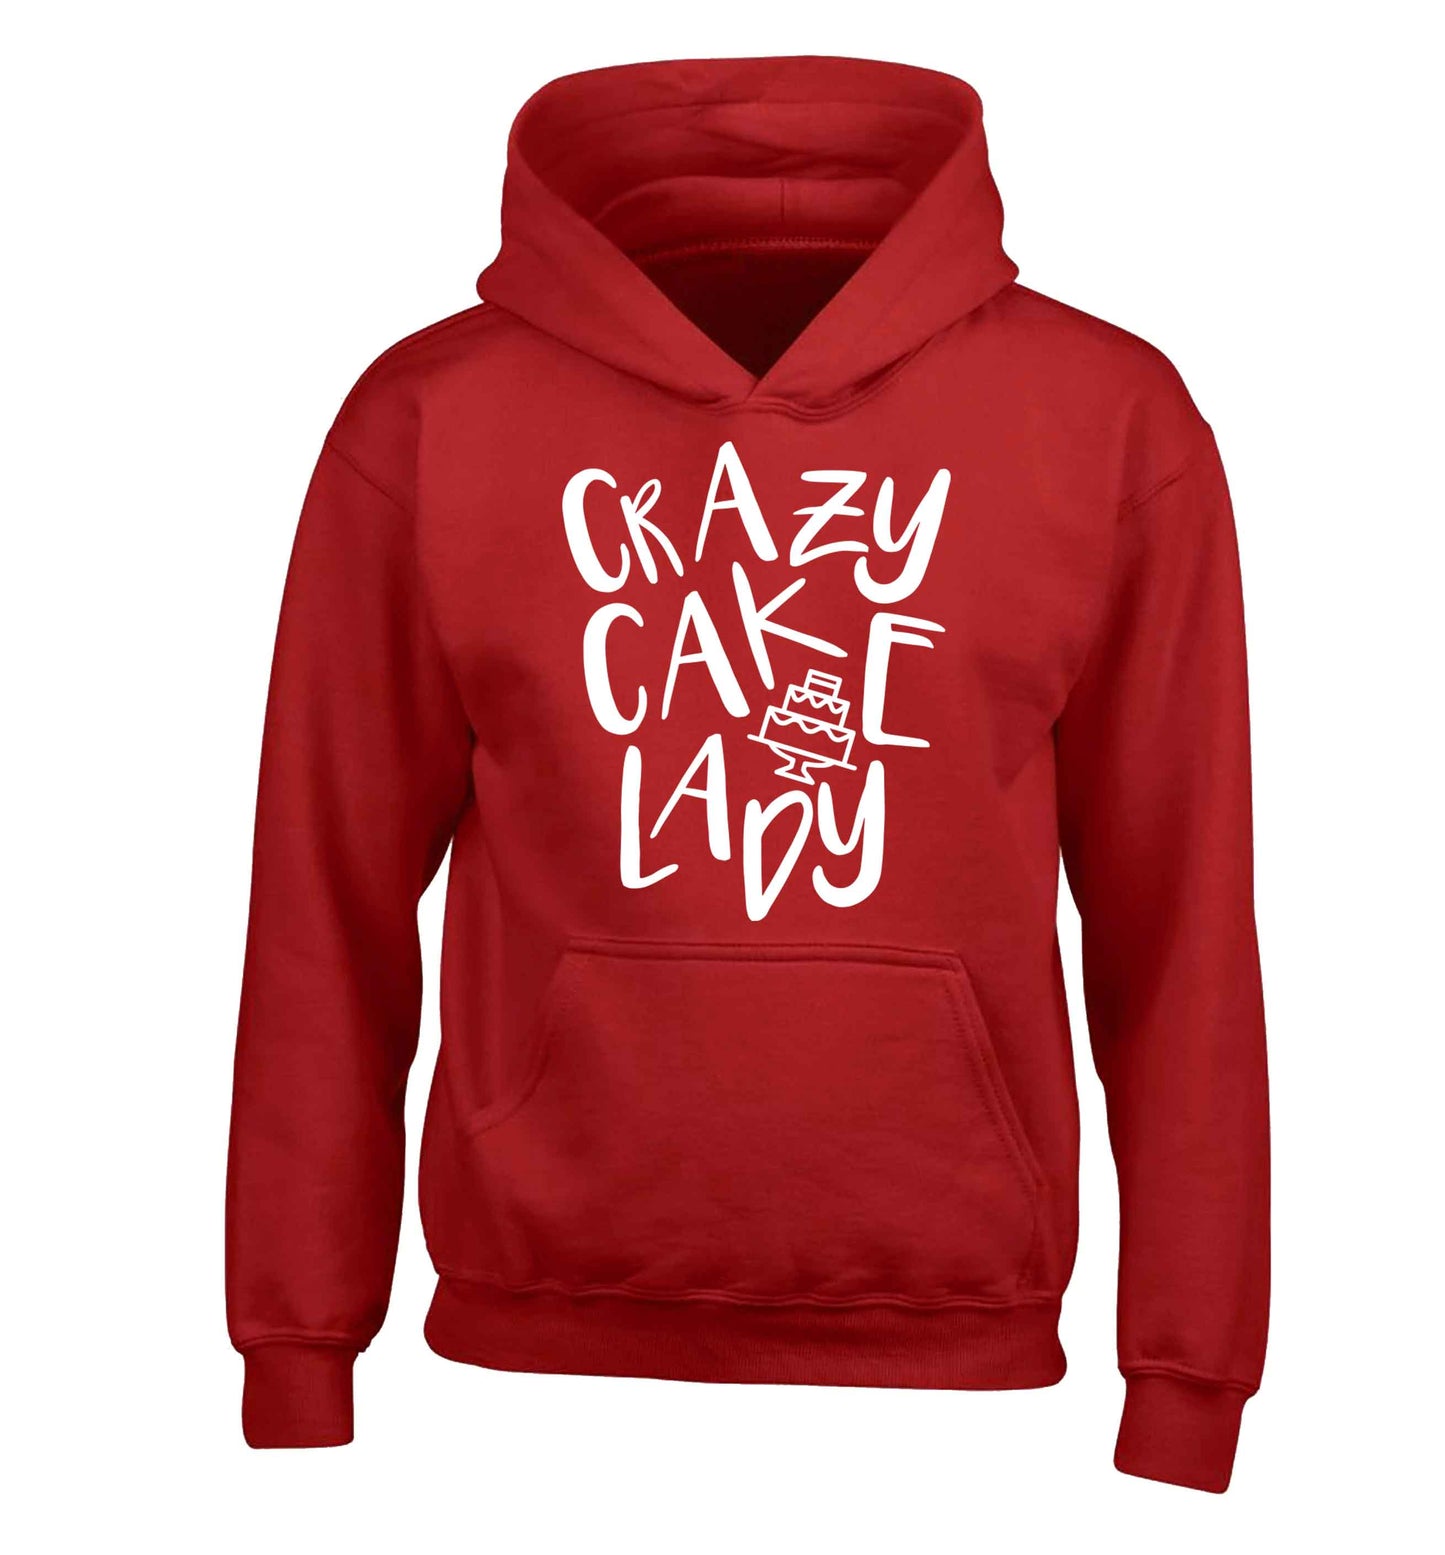 Crazy cake lady children's red hoodie 12-13 Years